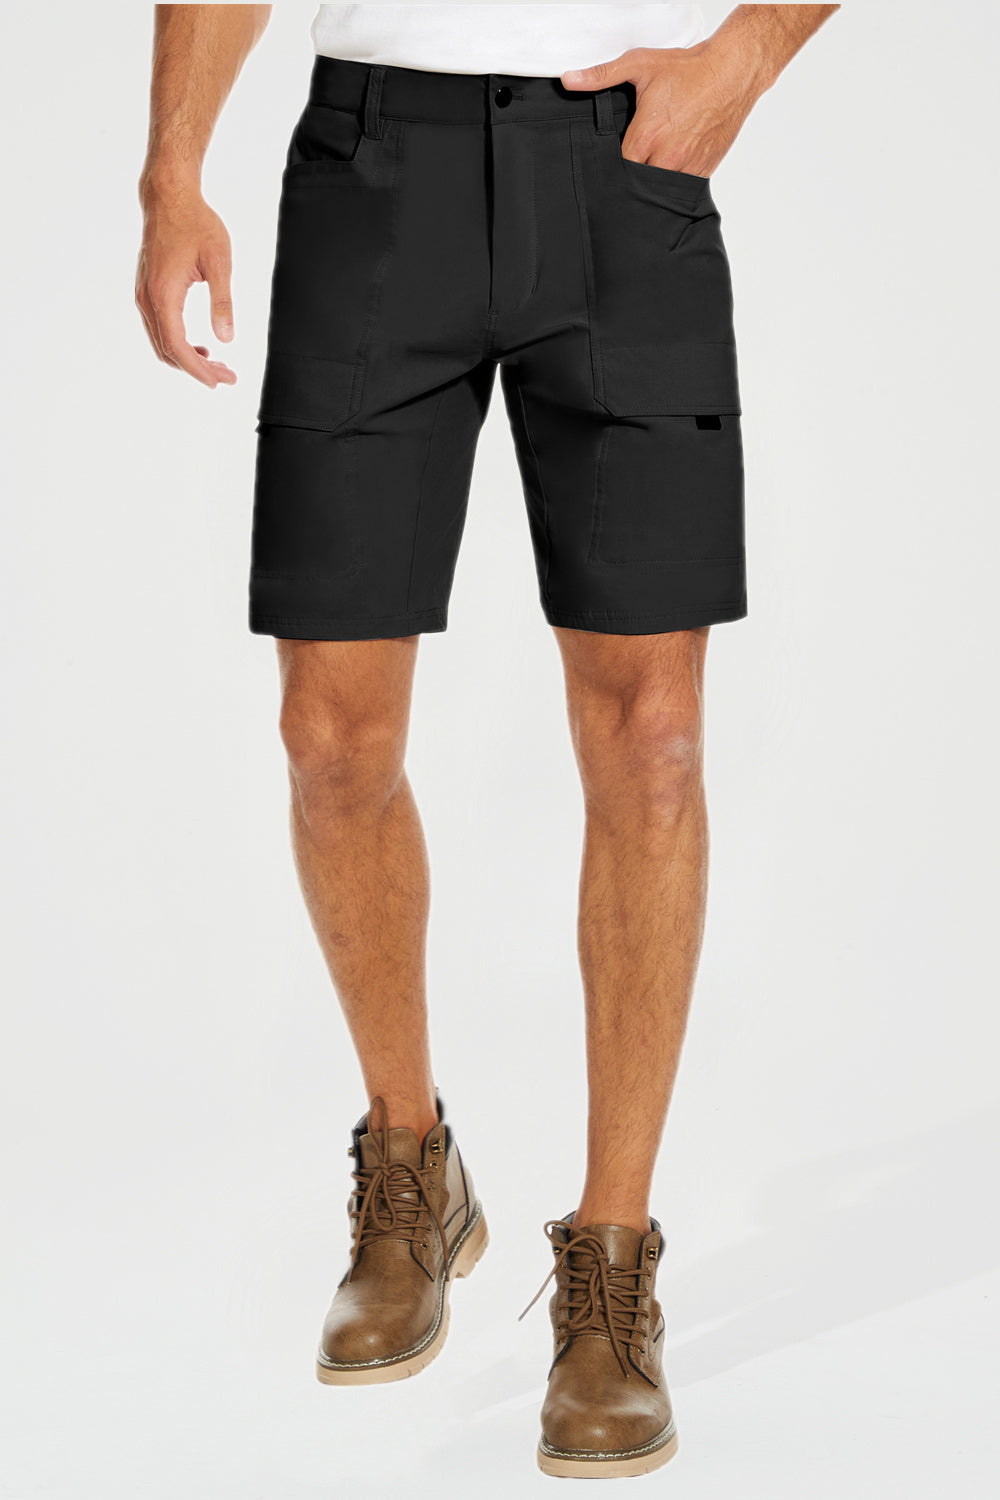 JEGULV Overstock Items Clearance All Men's Long Cargo Shorts with